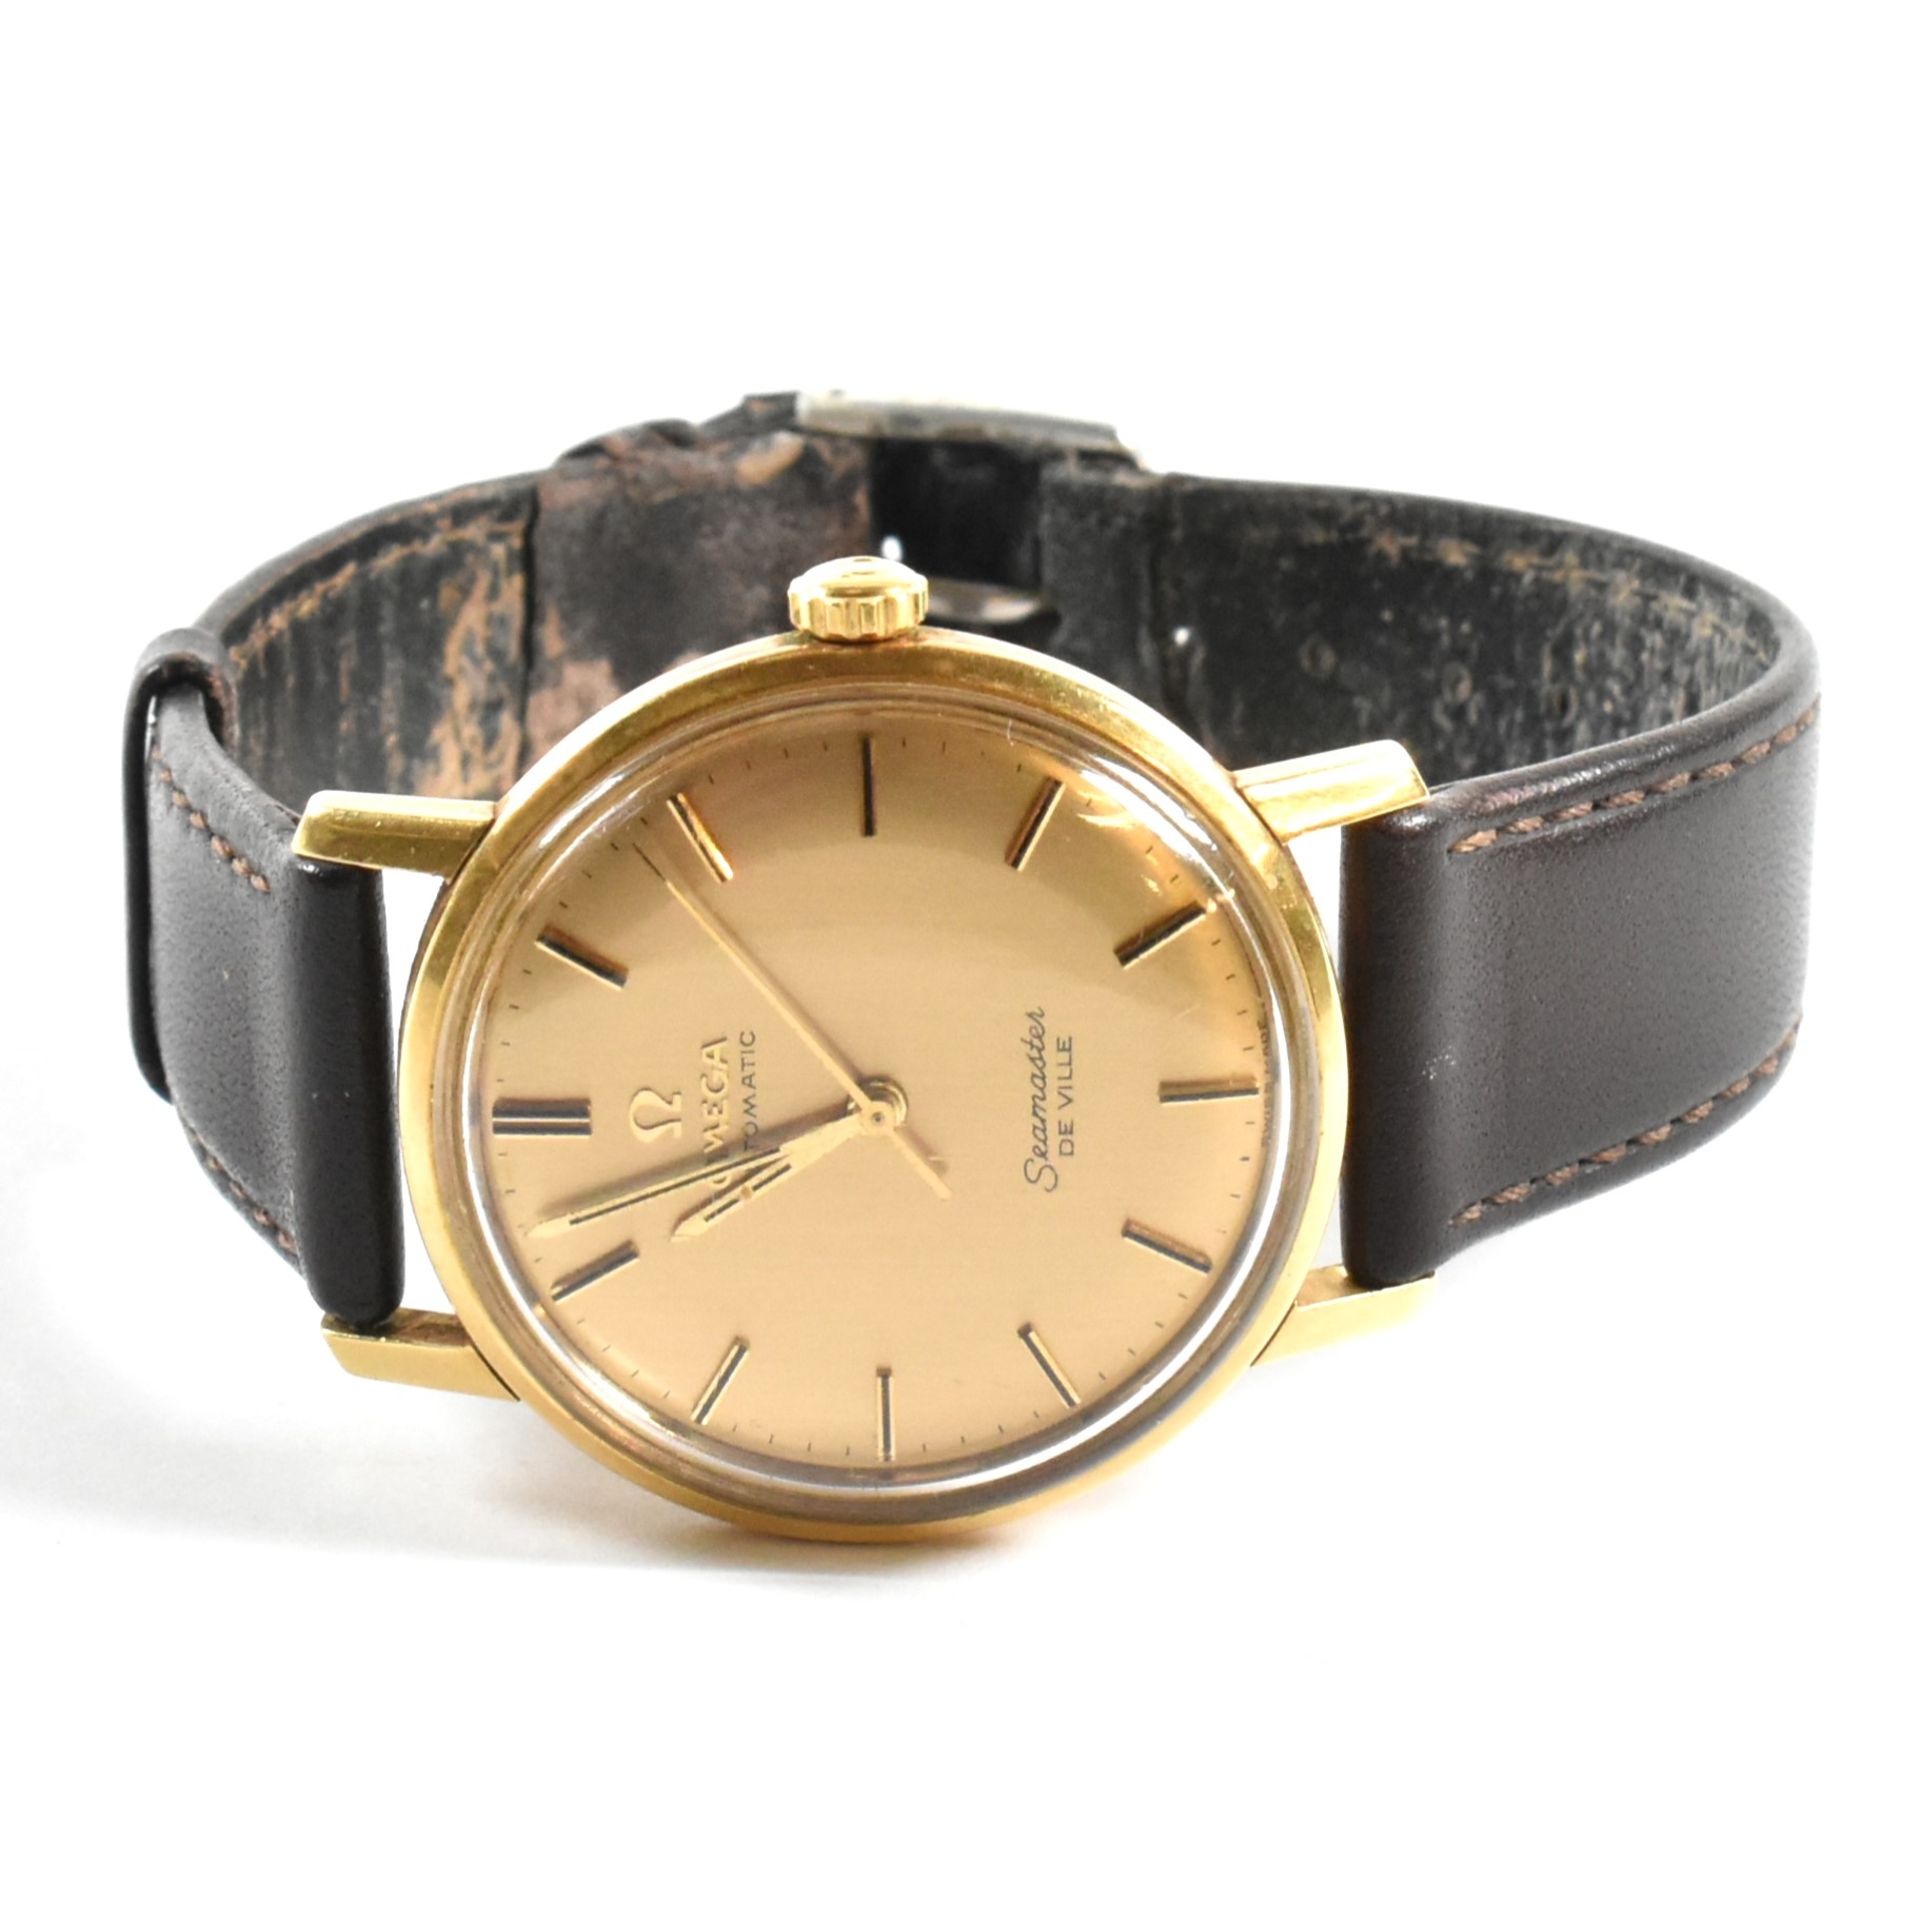 1960S 18CT GOLD OMEGA AUTOMATIC SEAMASTER DE VILLE WRISTWATCH - Image 3 of 6